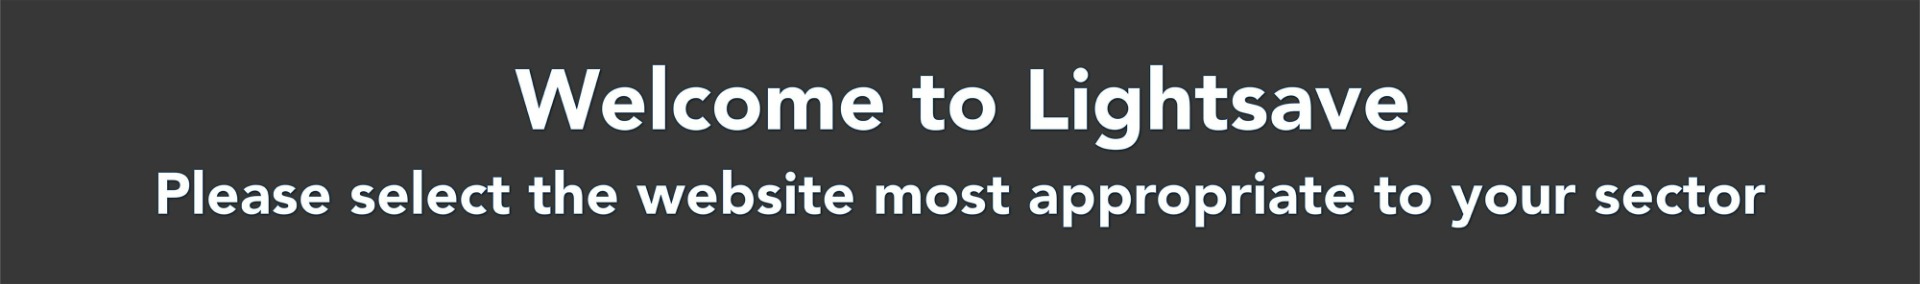 lightsave-pop-up-welcome-banner